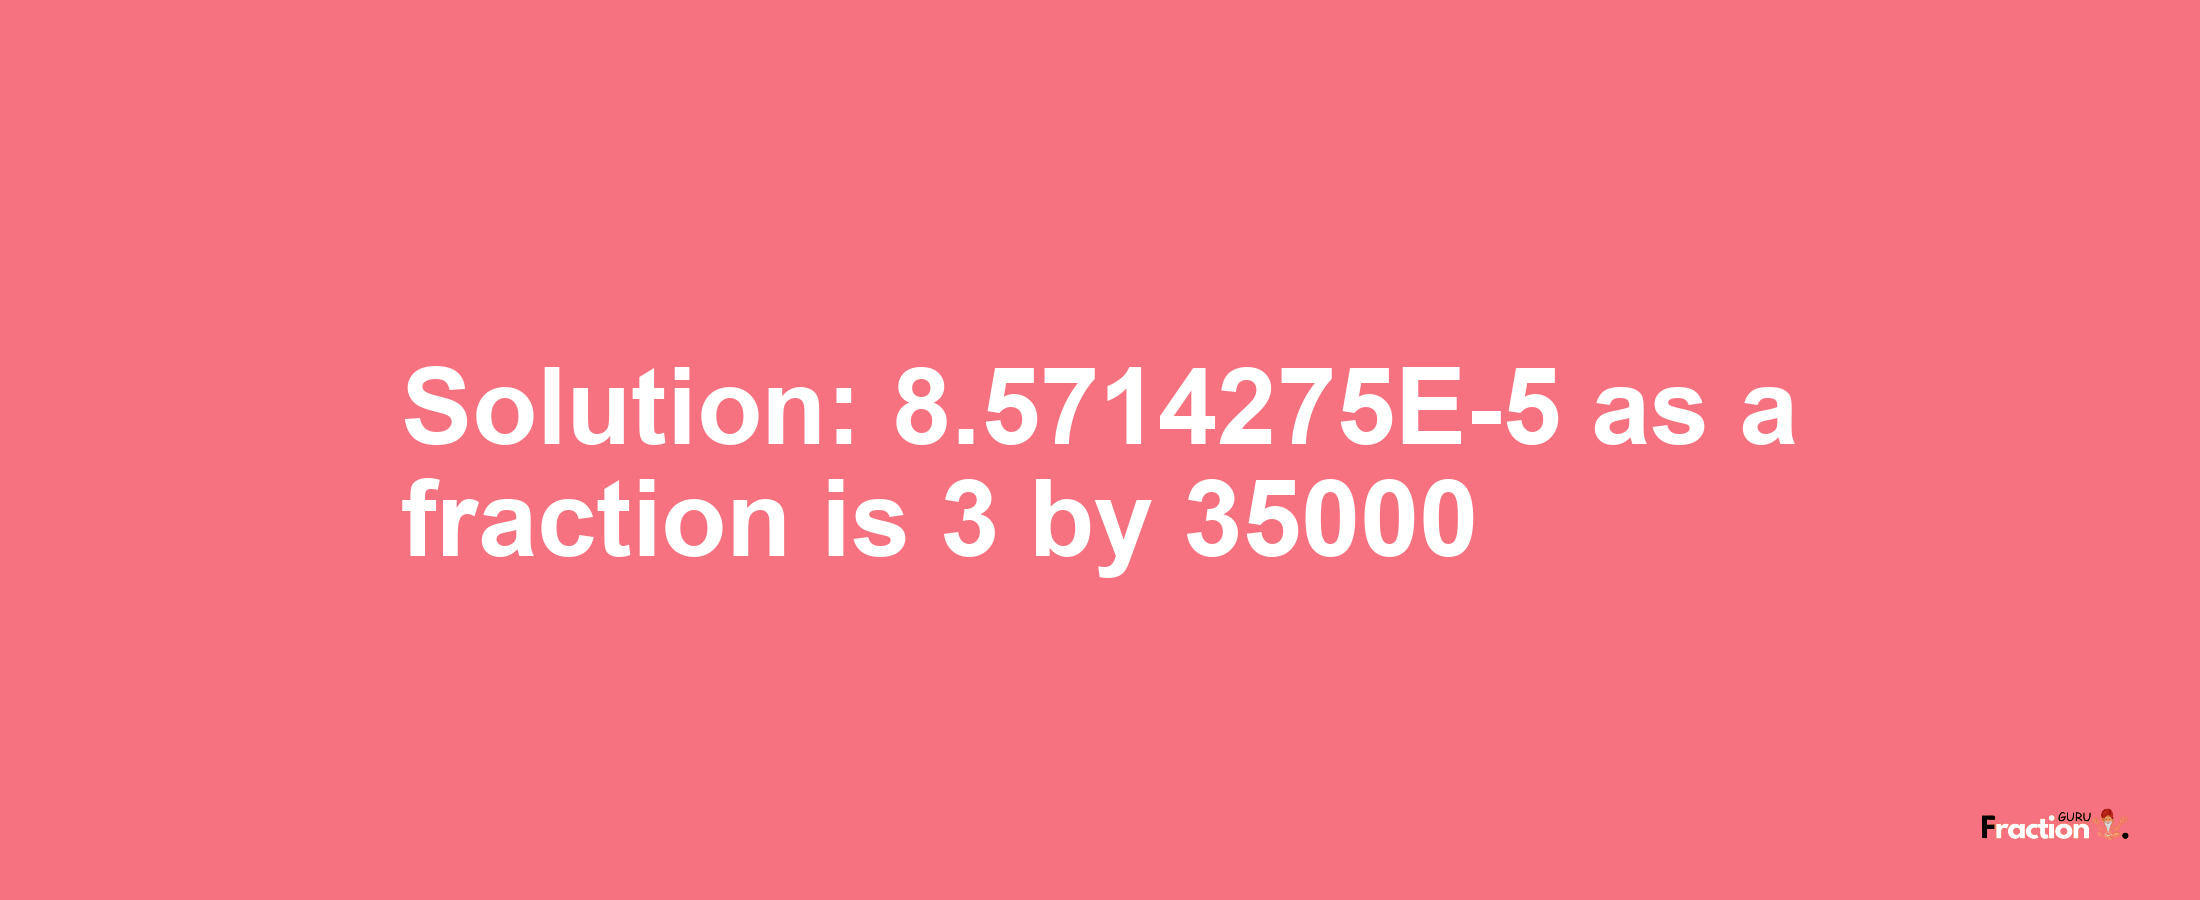 Solution:8.5714275E-5 as a fraction is 3/35000